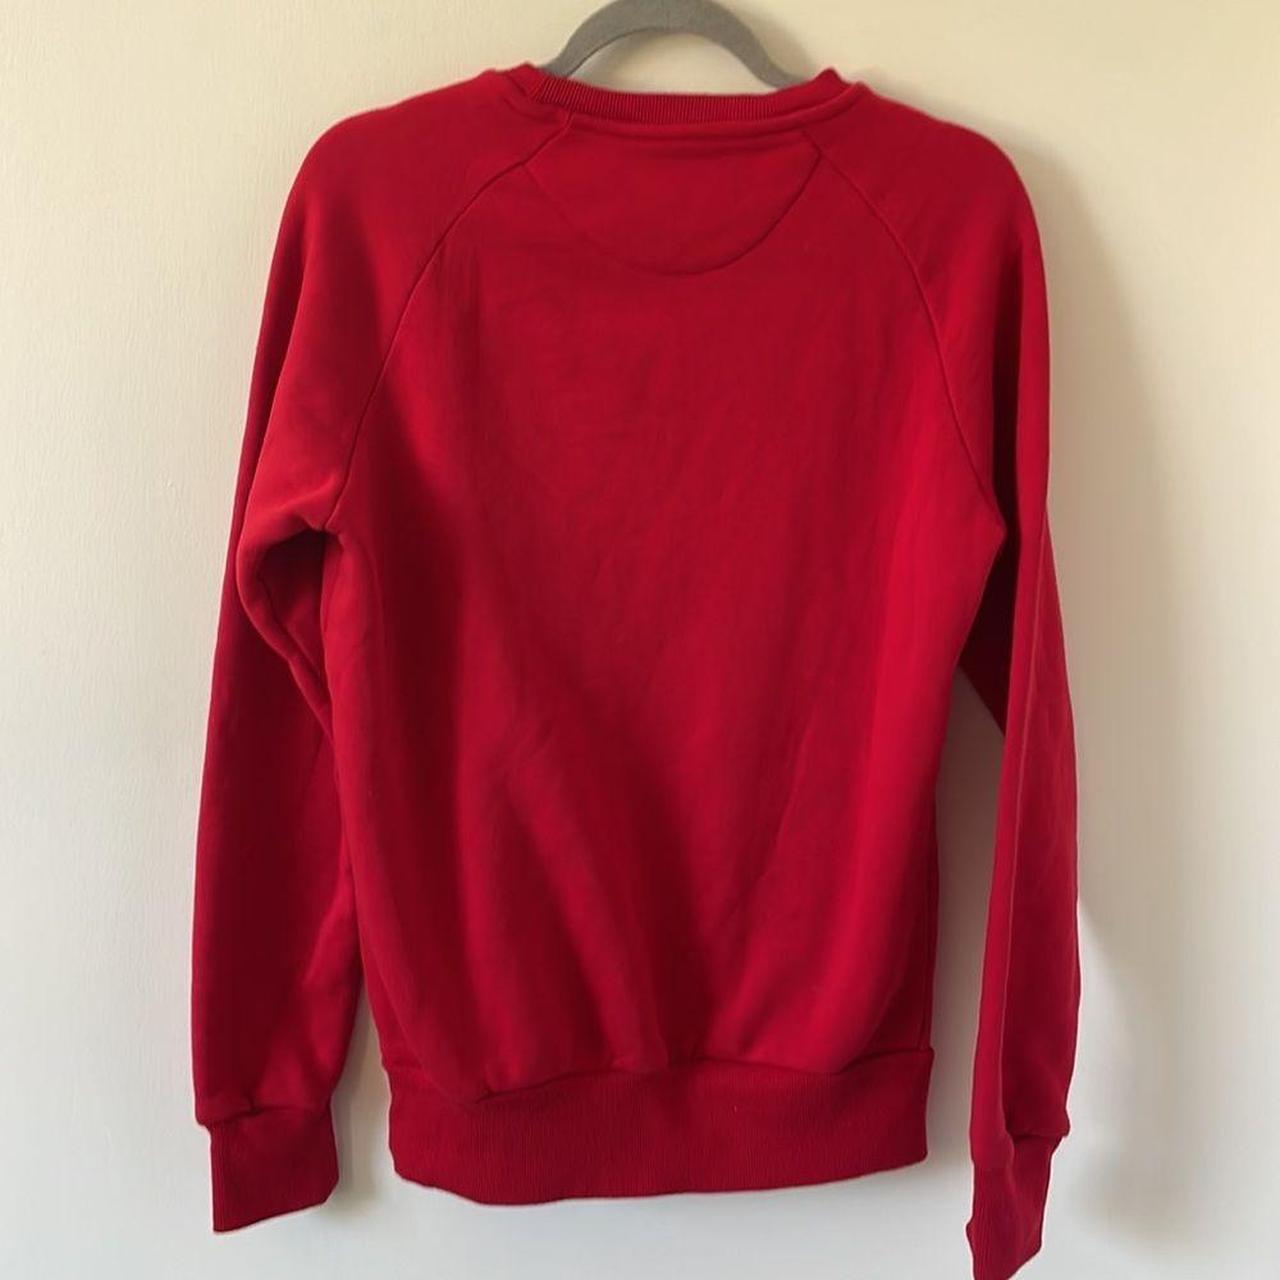 Product Image 3 - Brand: Primark
Size: Medium
Condition: Preowned with